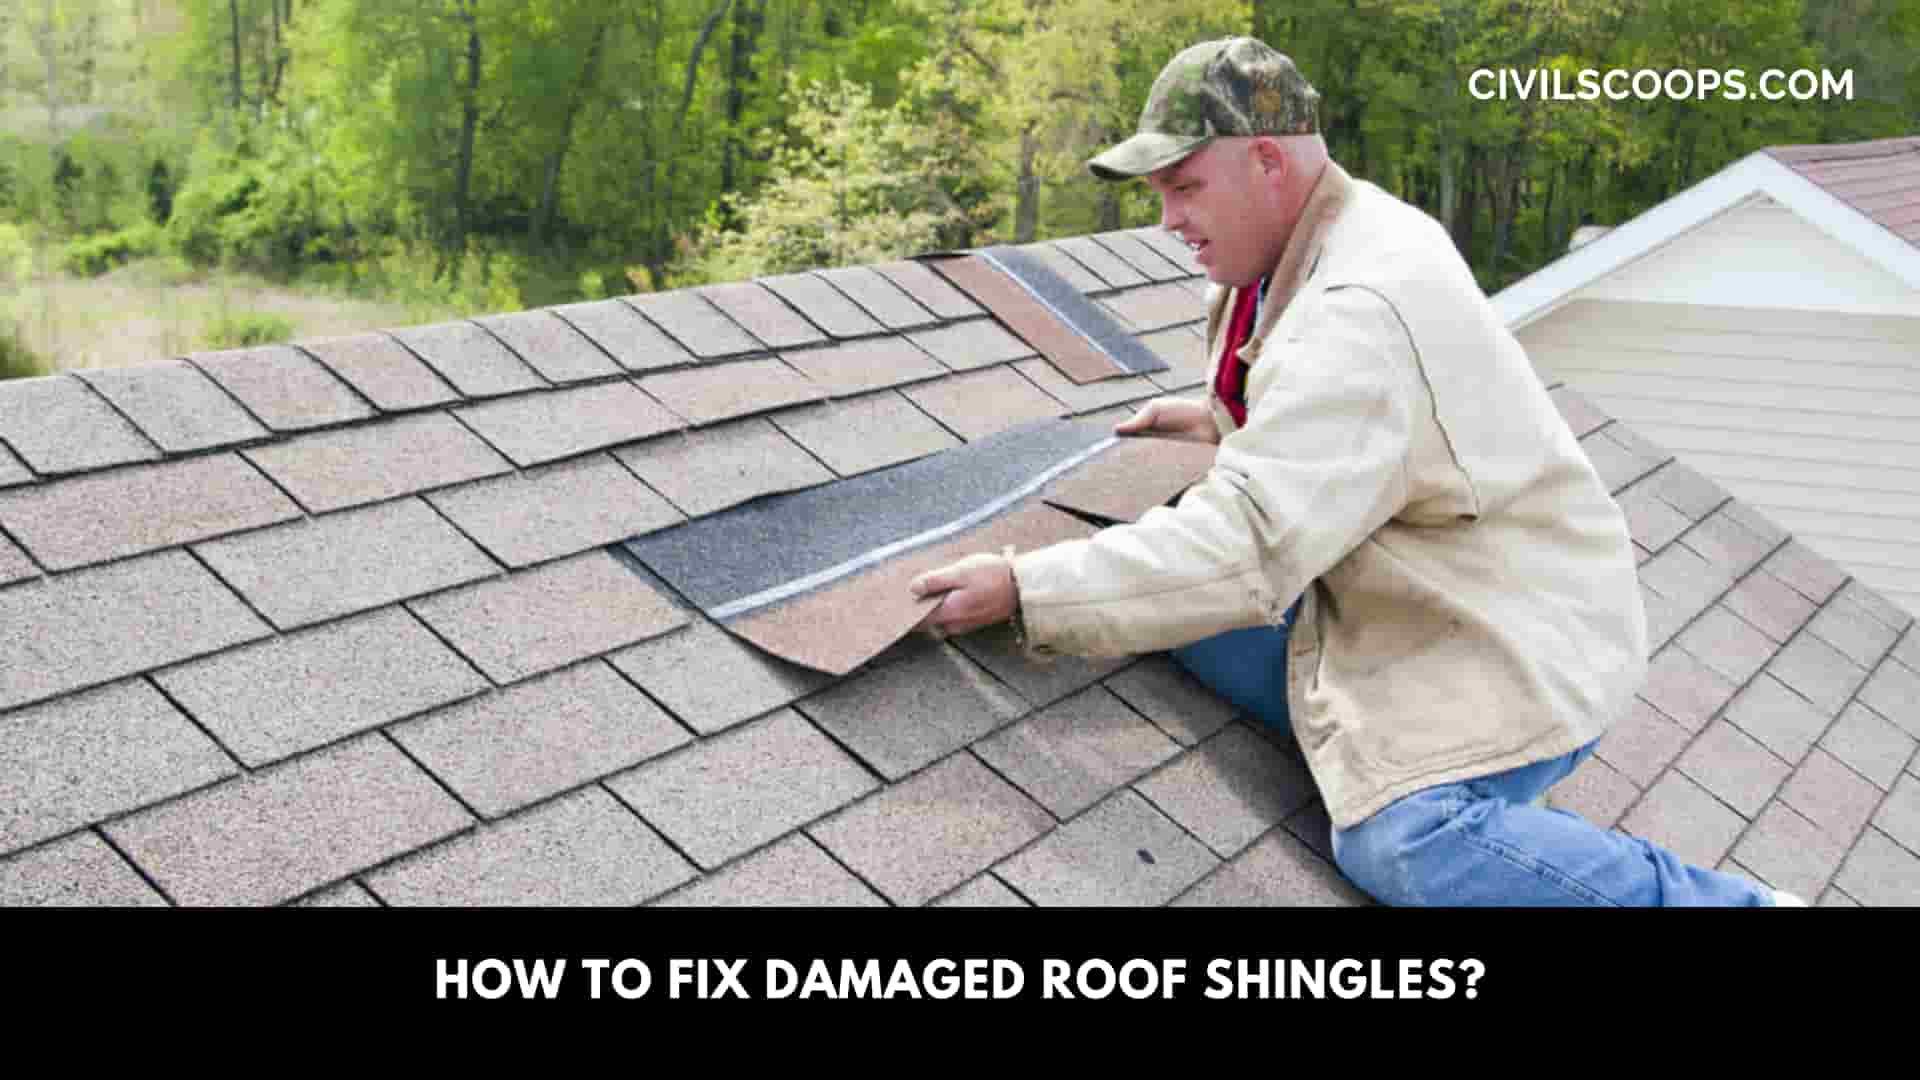 How to Fix Damaged Roof Shingles?